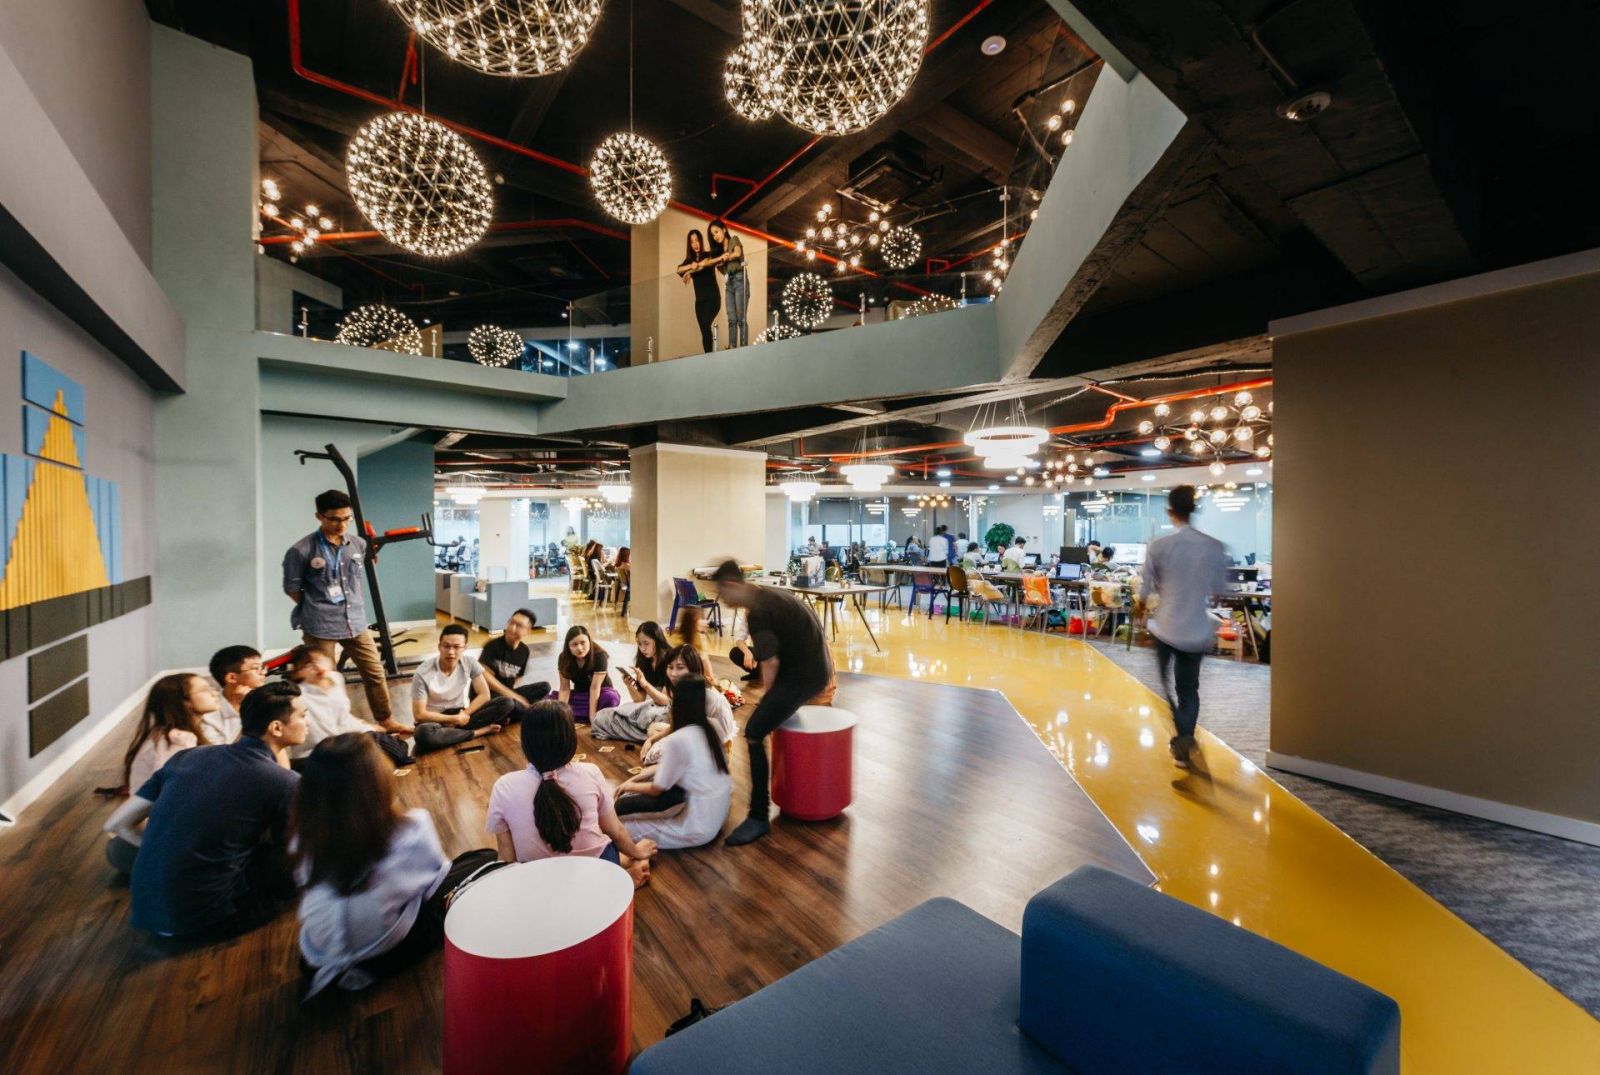 Co-working space will be at the forefront of future real estate.